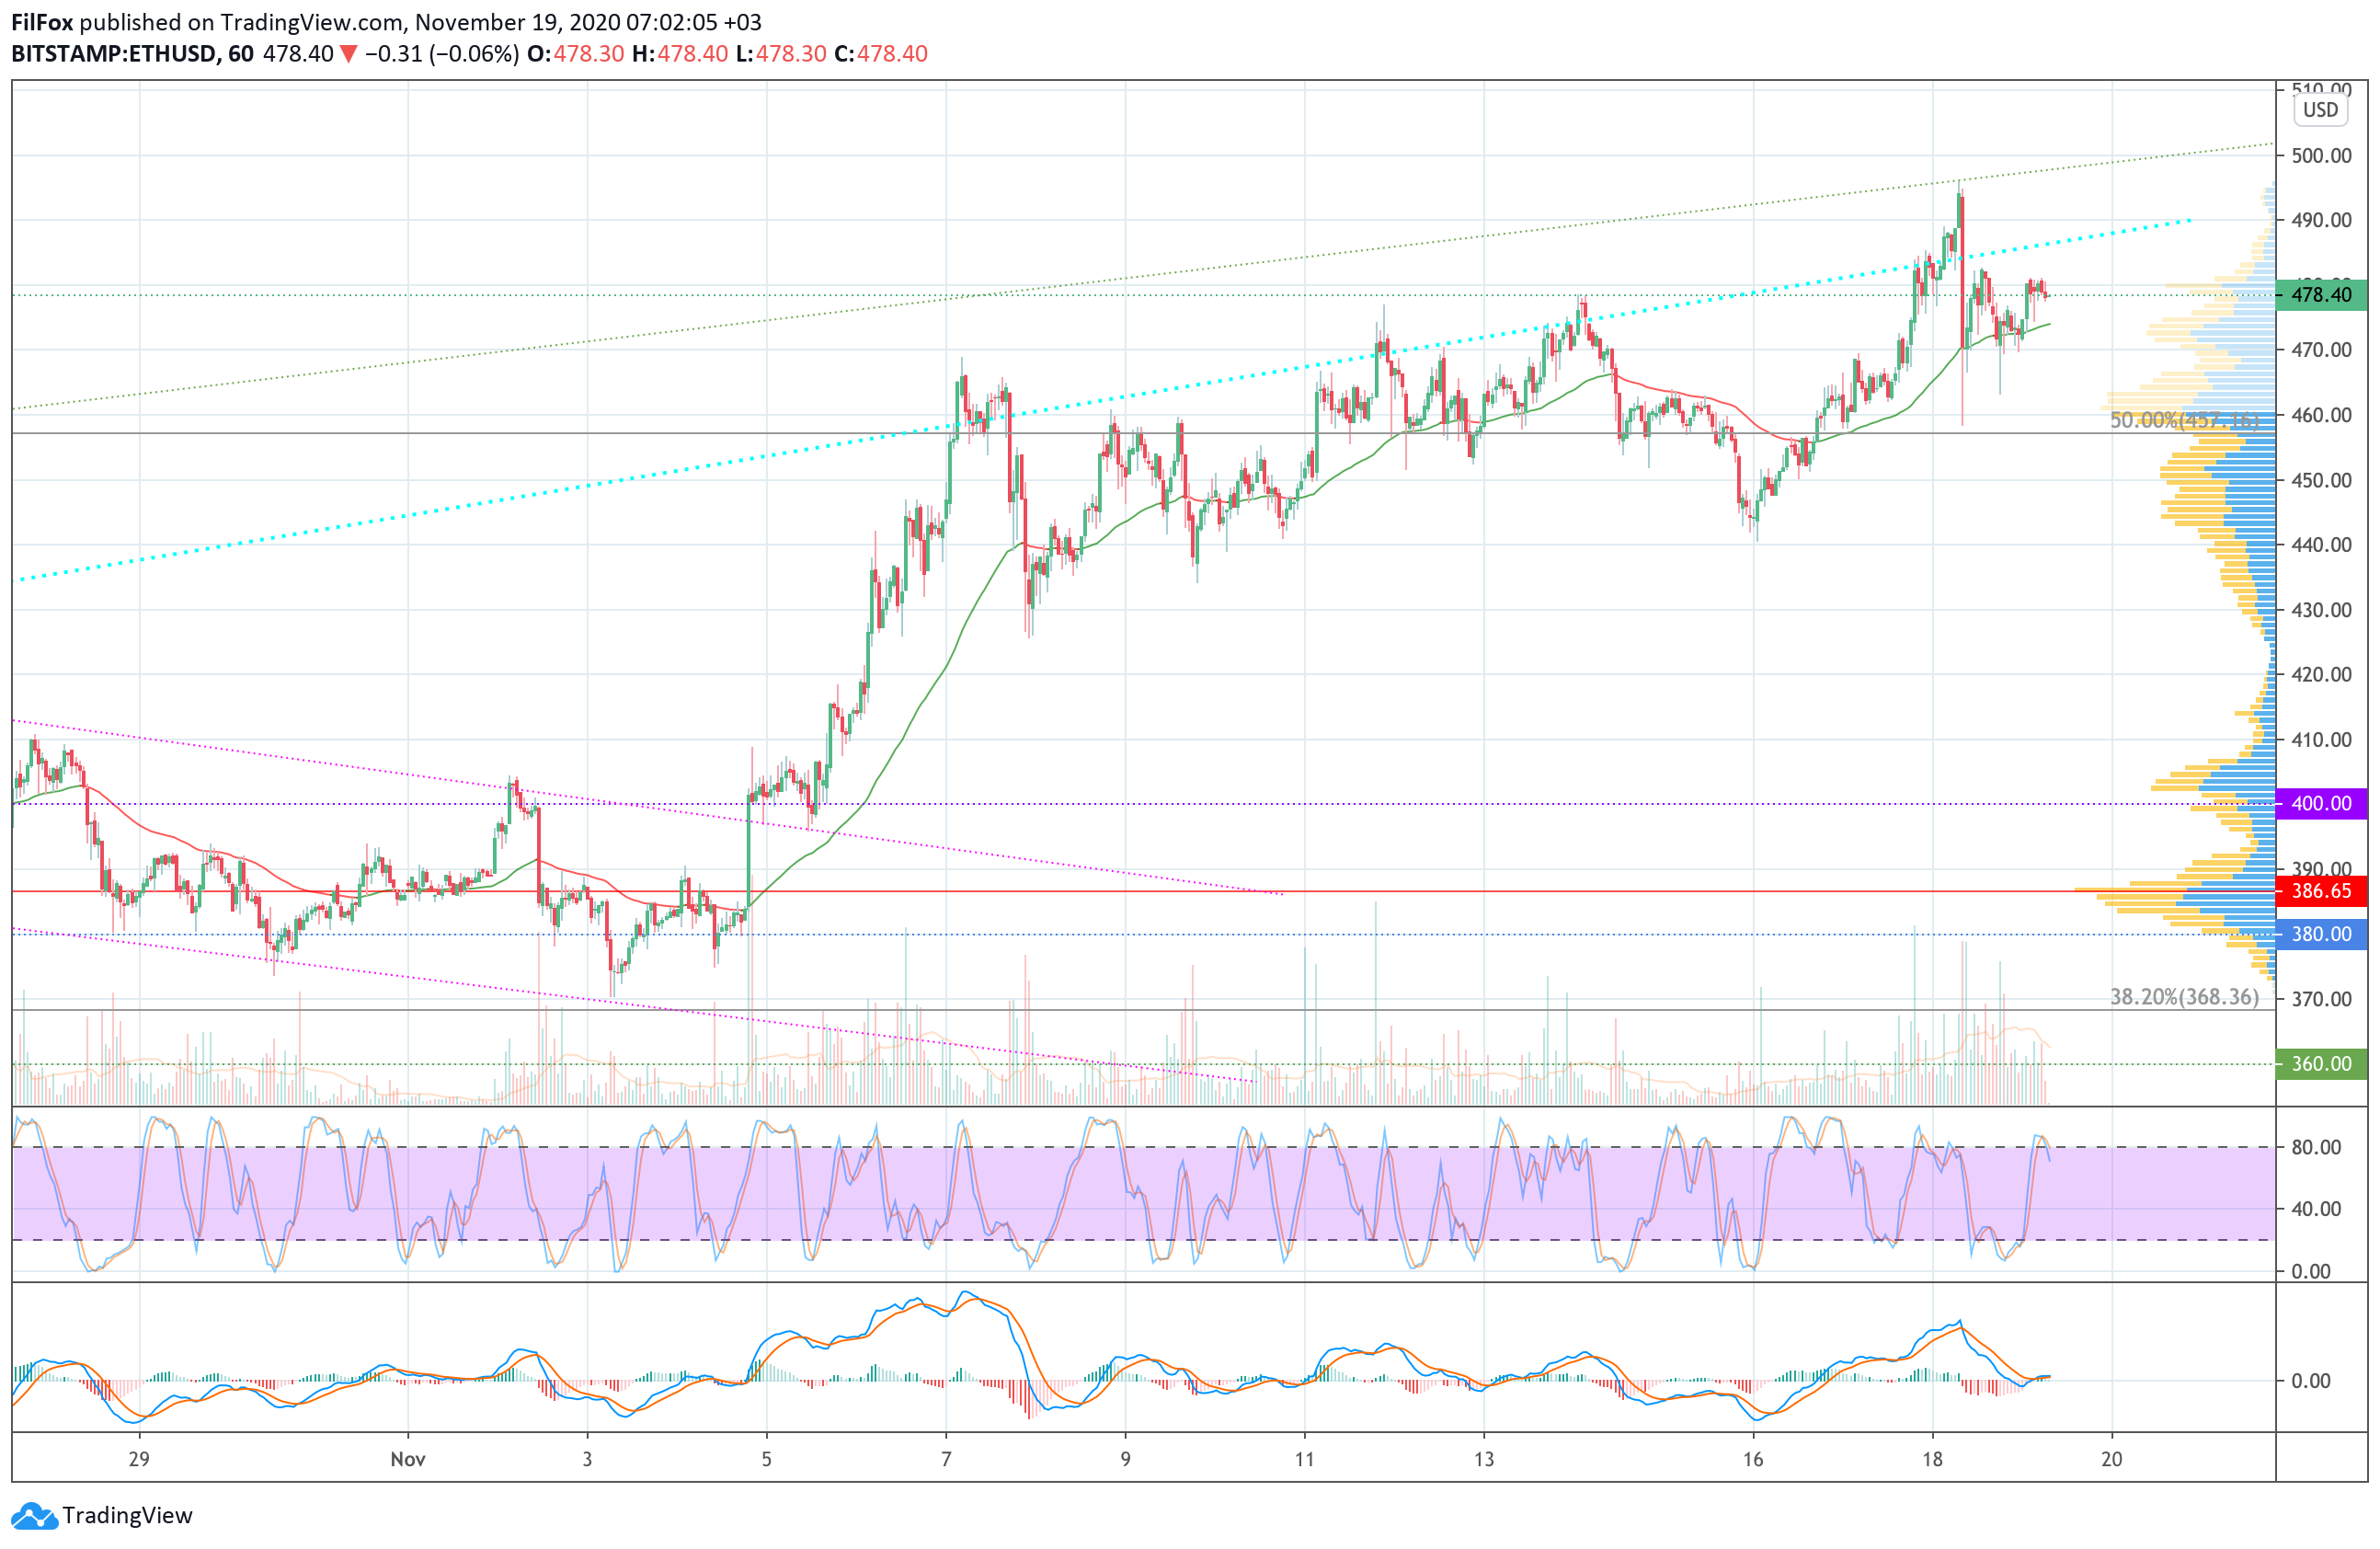 Analysis of the prices of Bitcoin, Ethereum, Ripple for 11/19/2020